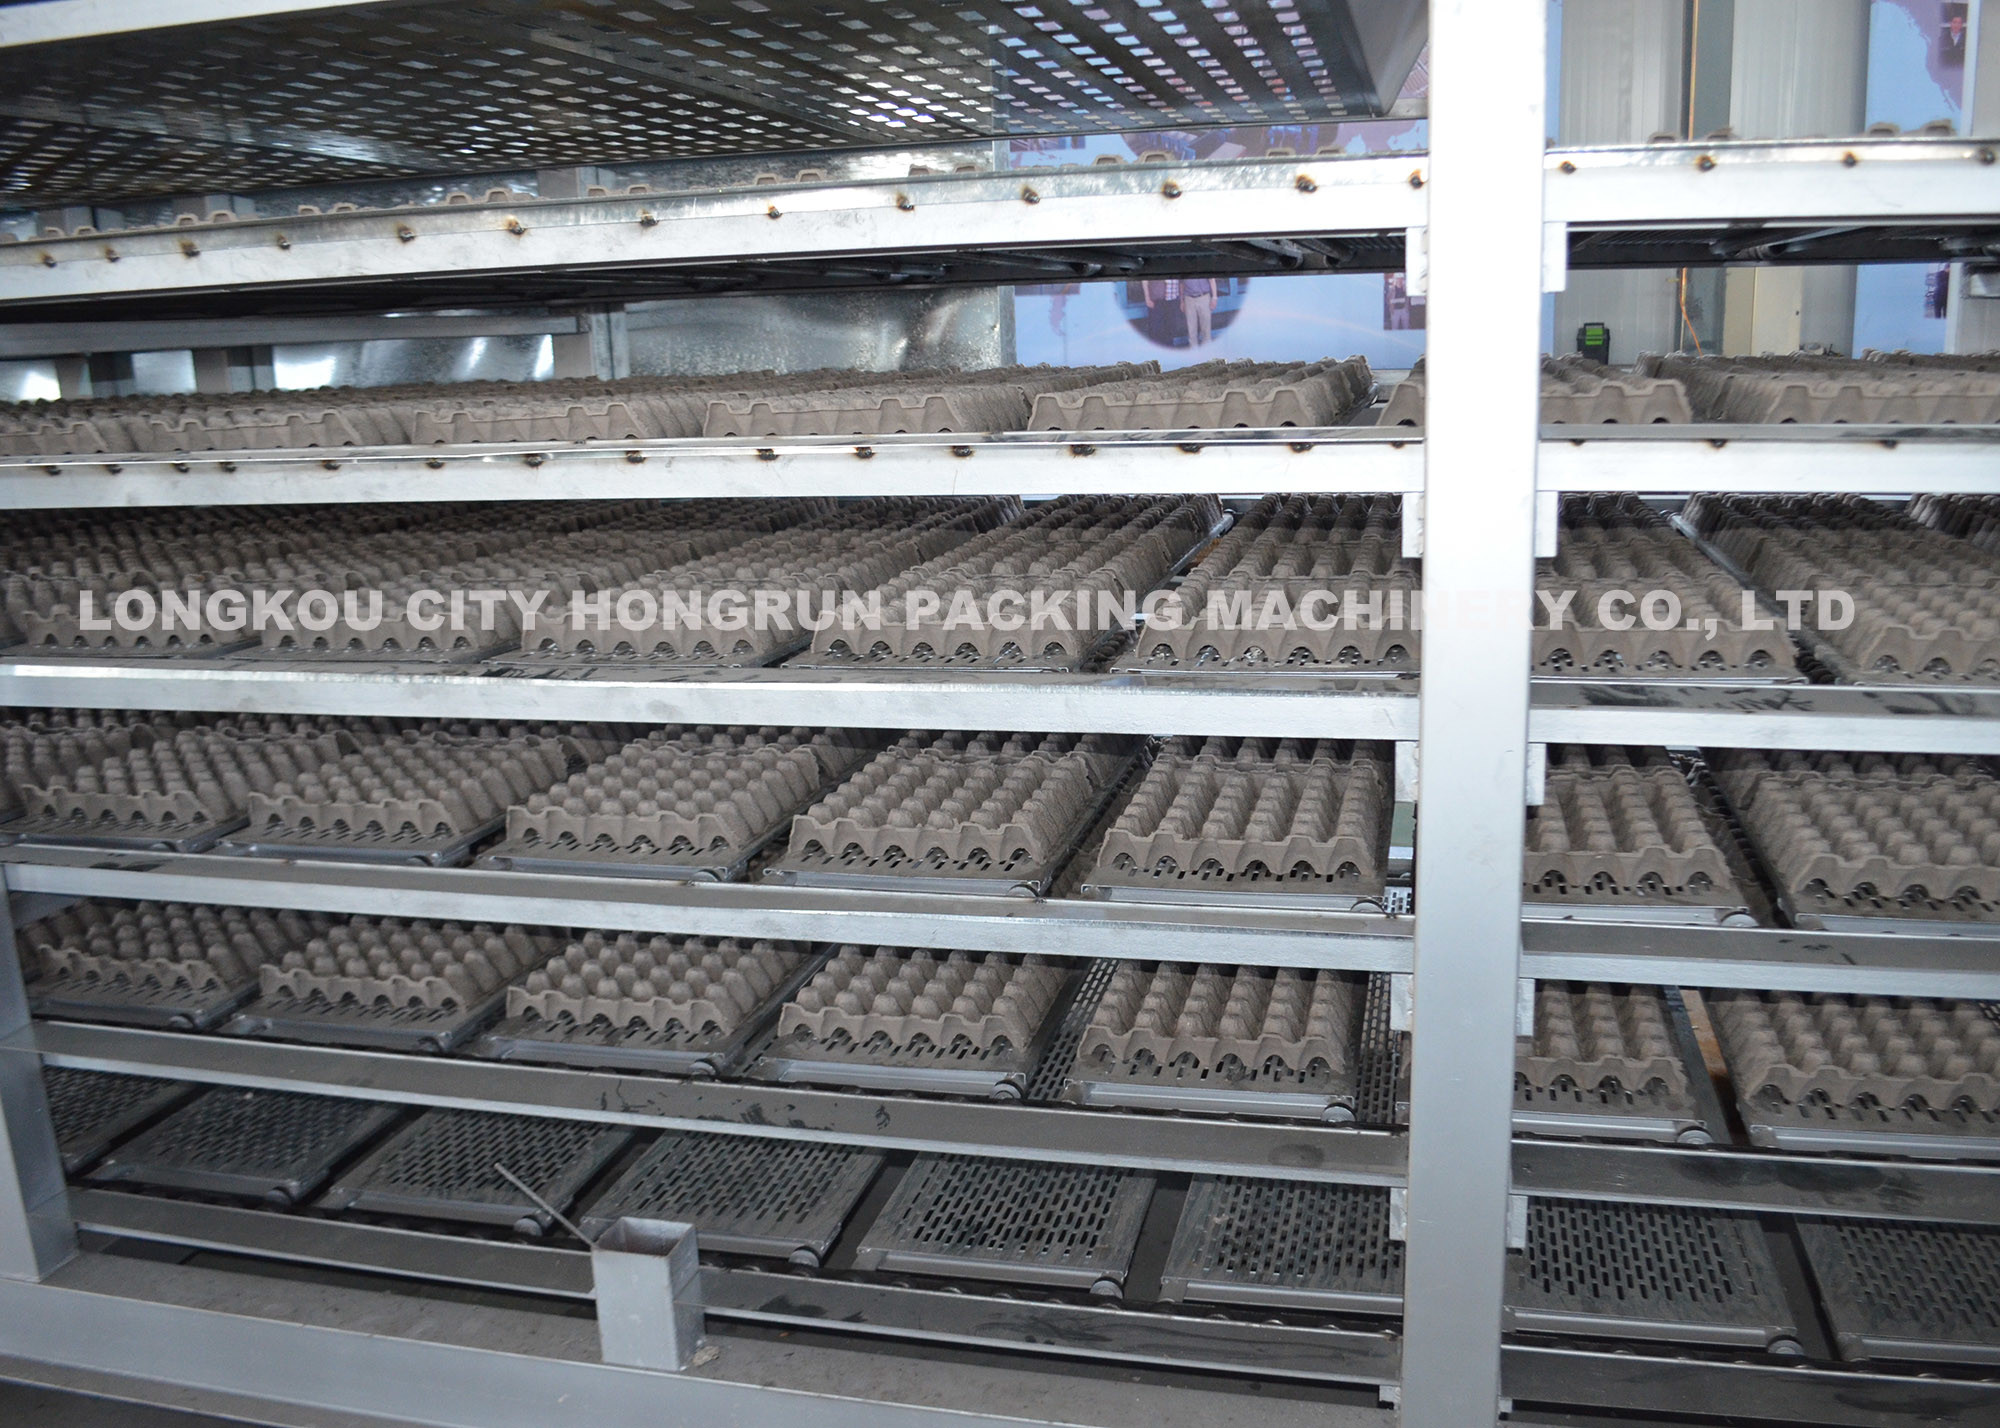 Quality Roller type paper egg tray machine , Egg carton box making machine for sale